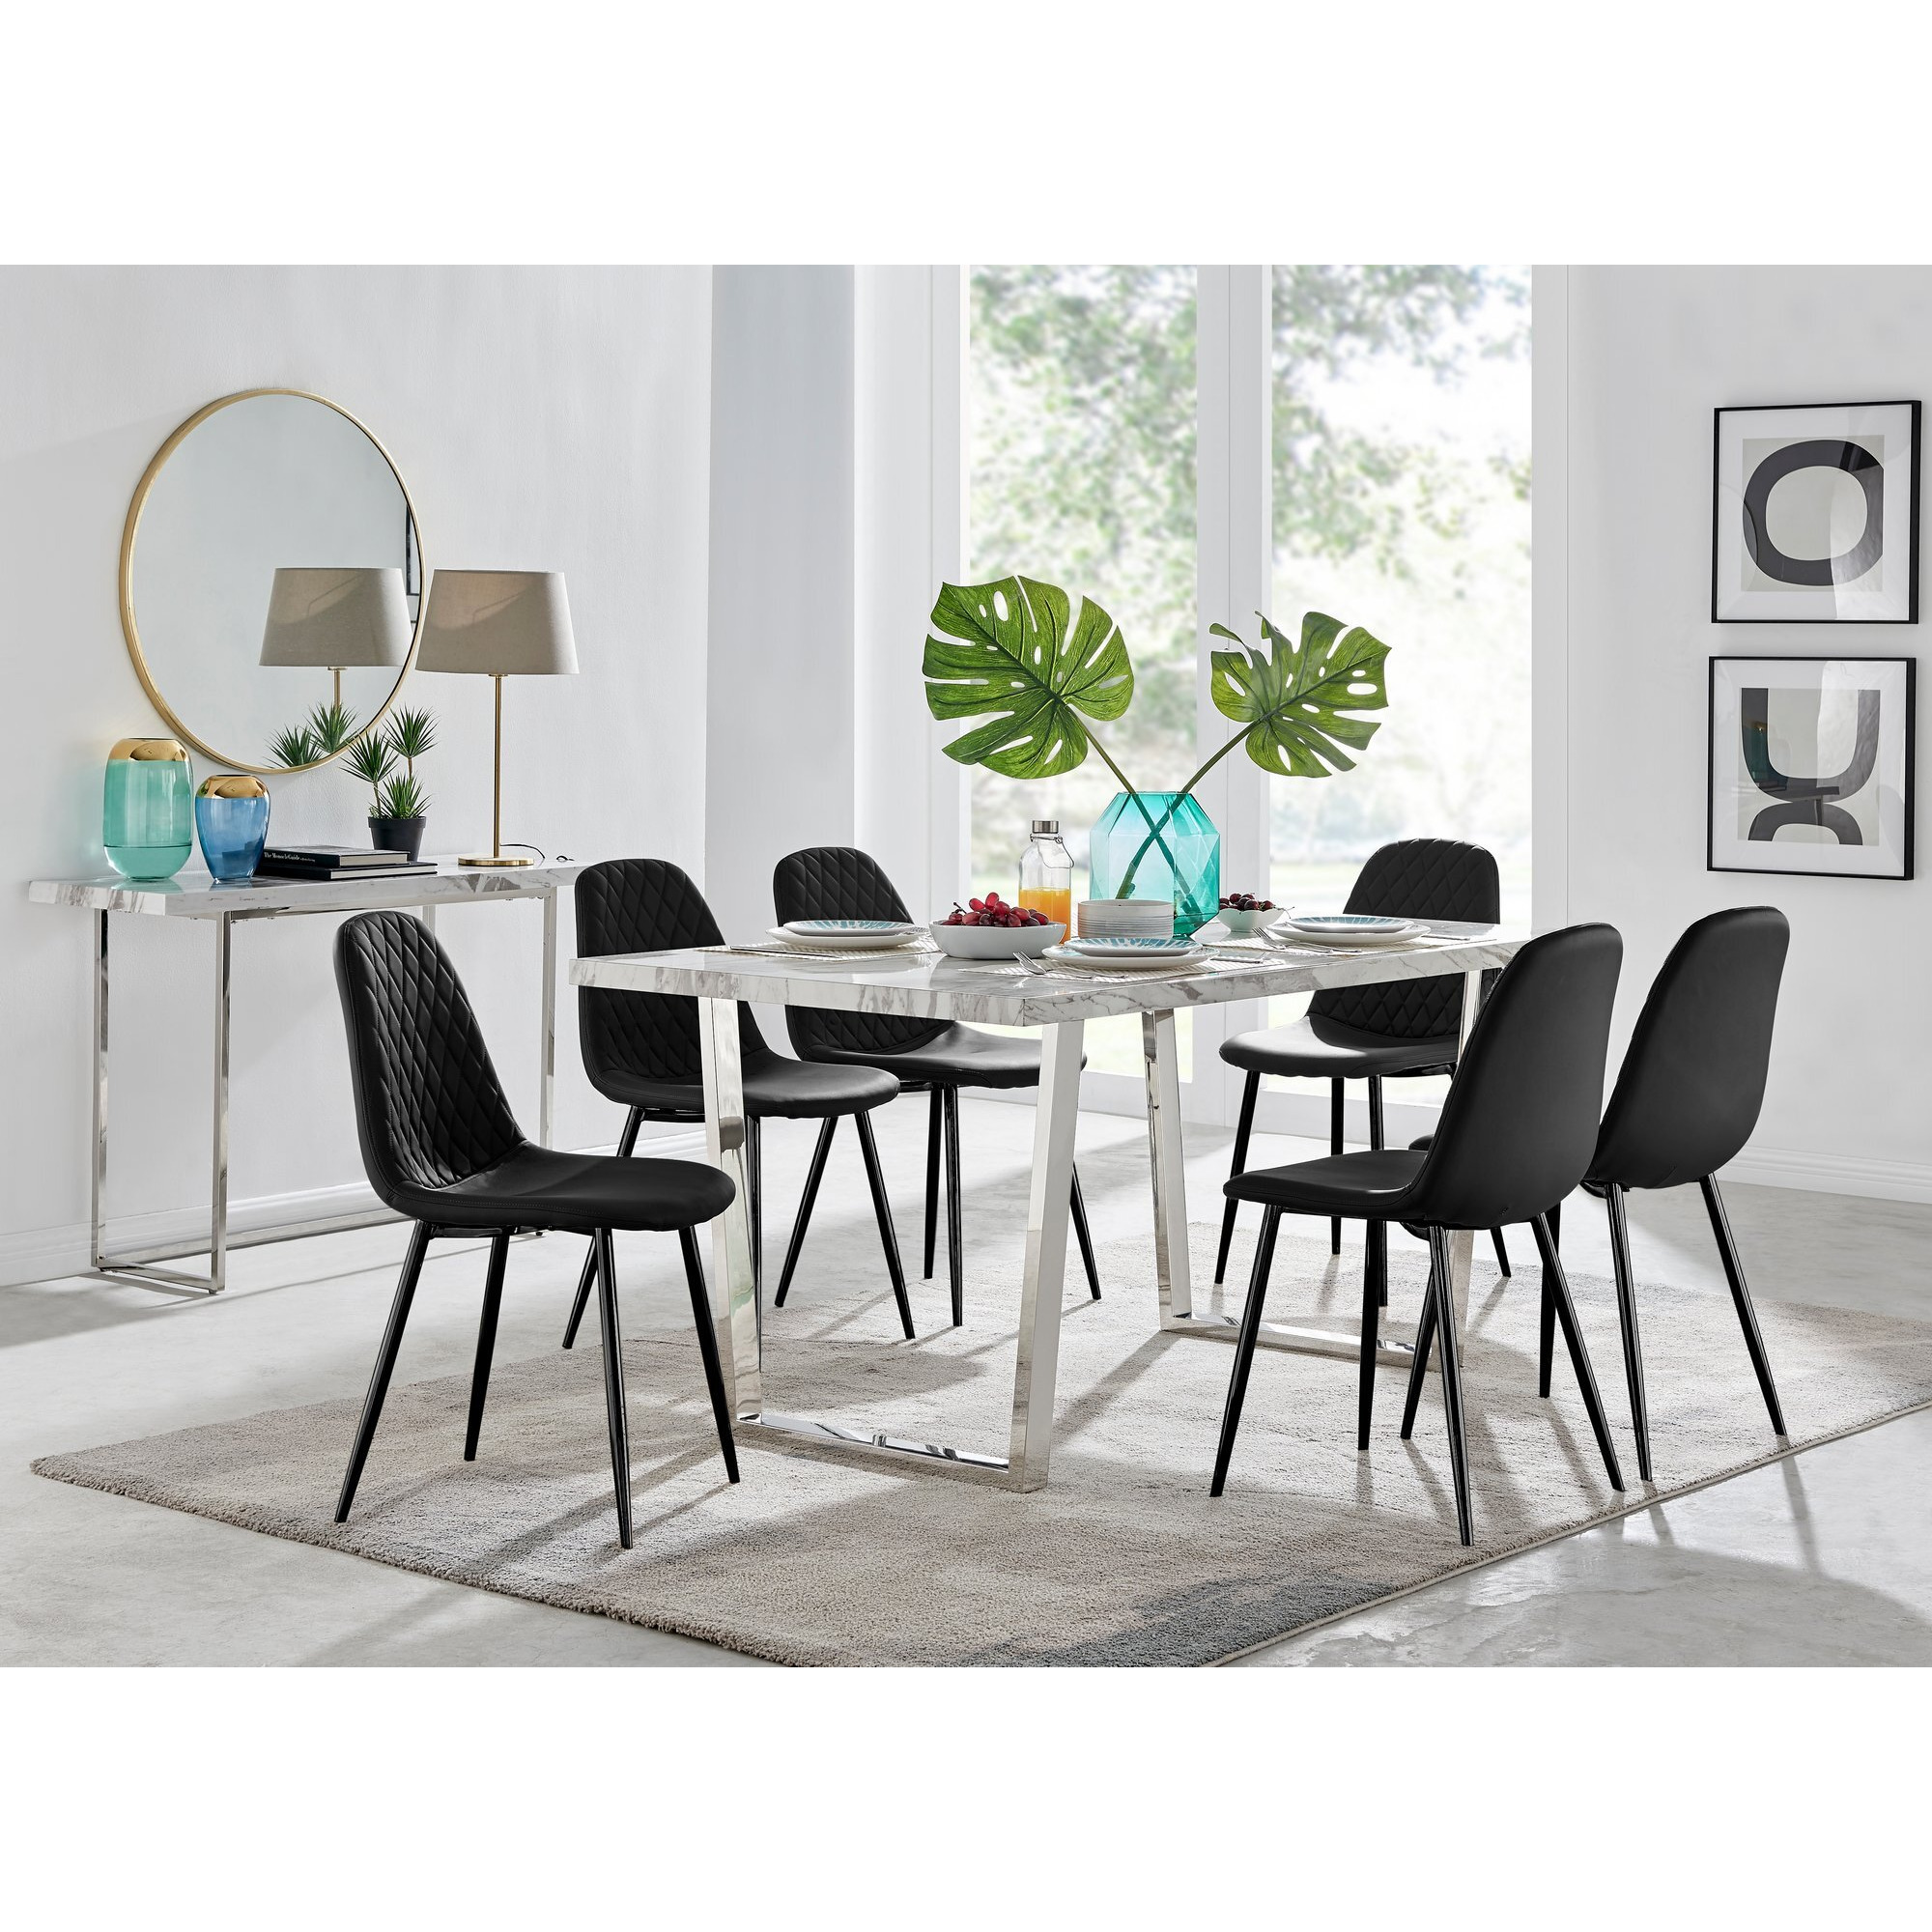 Kylo White Marble Effect Dining Table & 6 Corona Leg Chairs